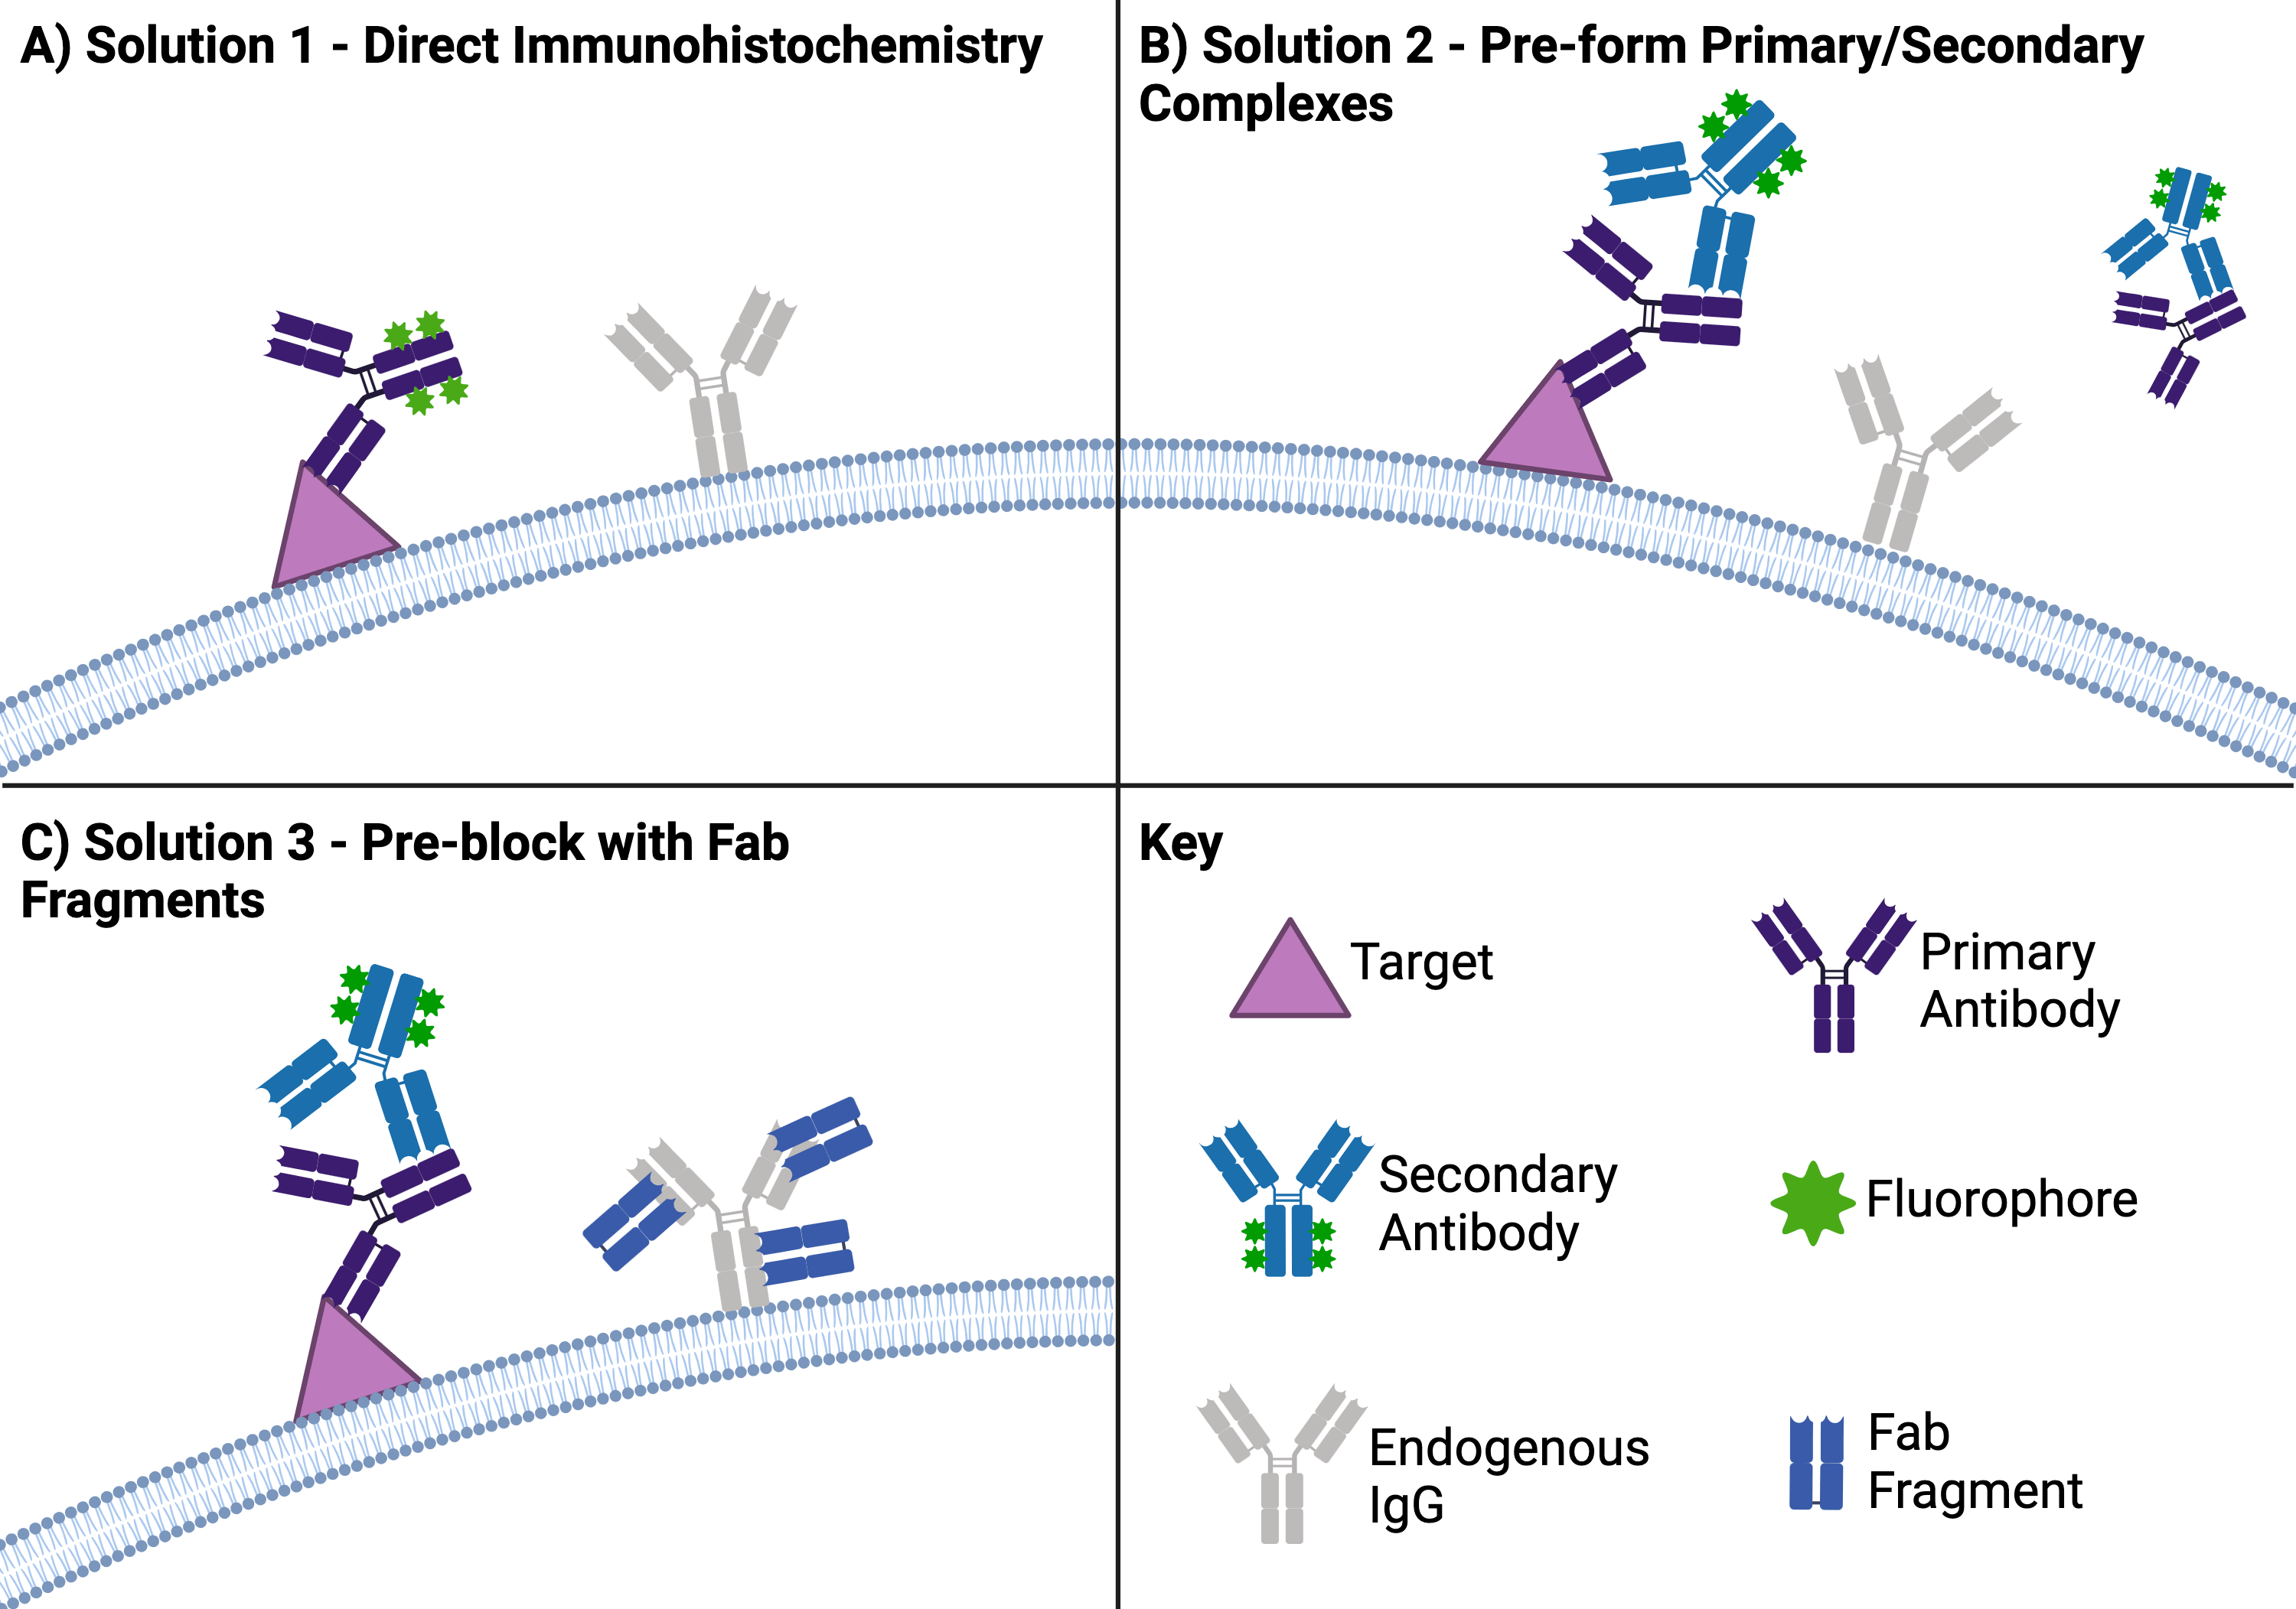 Three part schematic summarizing solutions for species on species IHC.Solution 1 - Direct Immunohistochemistry. A cell membrane with a target protein and an endogenous IgG. A primary antibody directly conjugated with fluorophores is bound to the target protein and nothing is bound to the endogenous IgG. Solution 2 - Pre-formed Primary/Secondary Complexes. The same cell membrane with the target protein bound by a pre-conjugated primary and secondary antibody complex. Unbound primary/secondary complex in the sample is ready to be washed away, while the endogenous IgG is unbound. Solution 3 - Pre-block with Fab Fragments. The same cell membrane with the target protein bound by a primary antibody and secondary antibody conjugated to fluorophores while the endogenous IgG is bound with unconjugated Fab Fragments. 